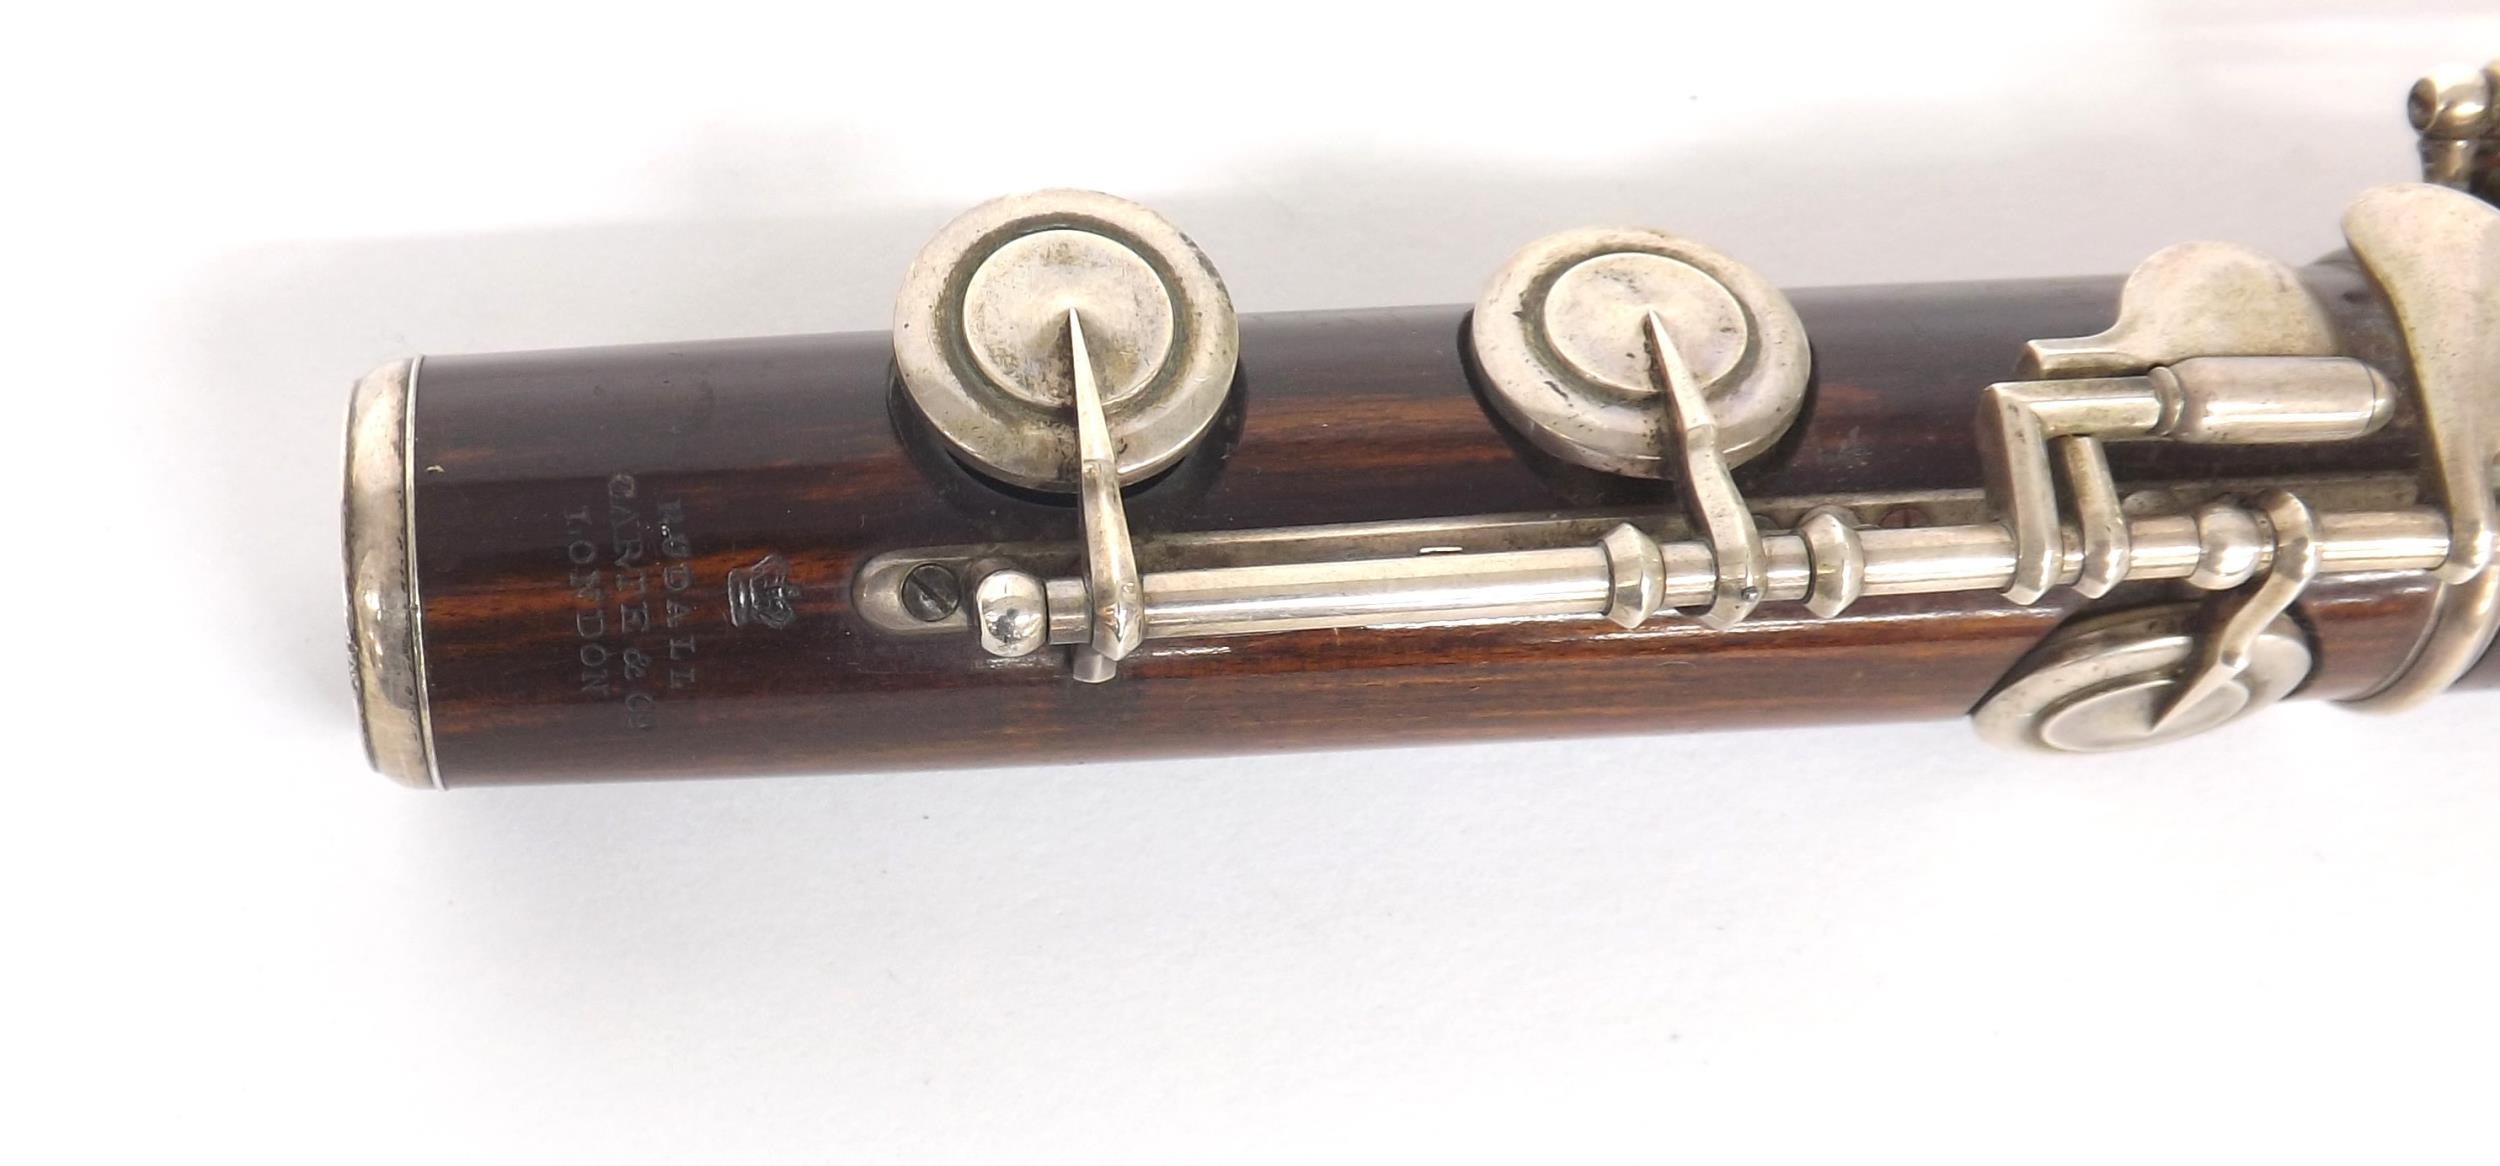 Cocuswood flute with silver keywork, stamped Rudall Carte & Co, 23 Berners Street, Oxford Street, - Image 3 of 3